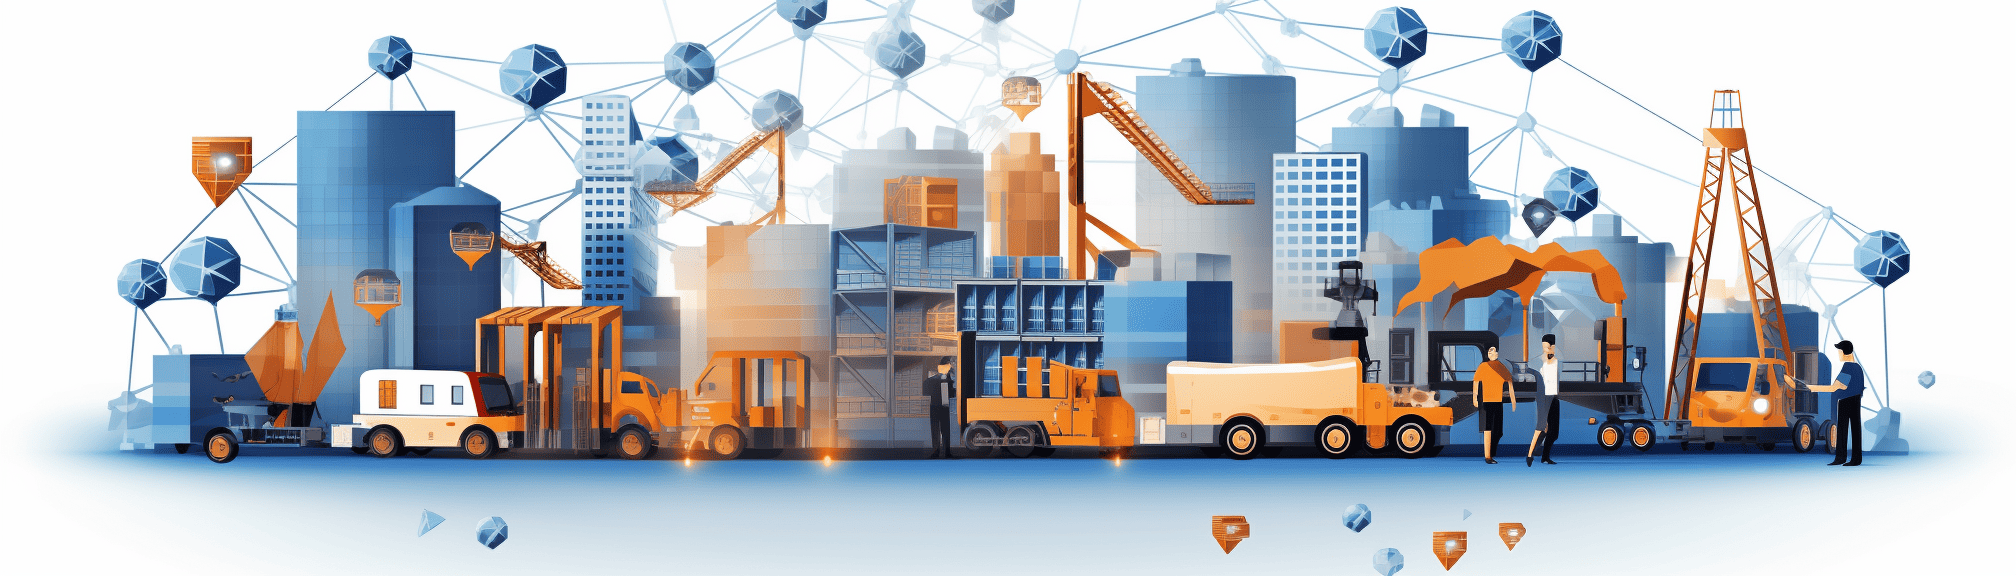 Web3 and Blockchain in Supply Chain Management